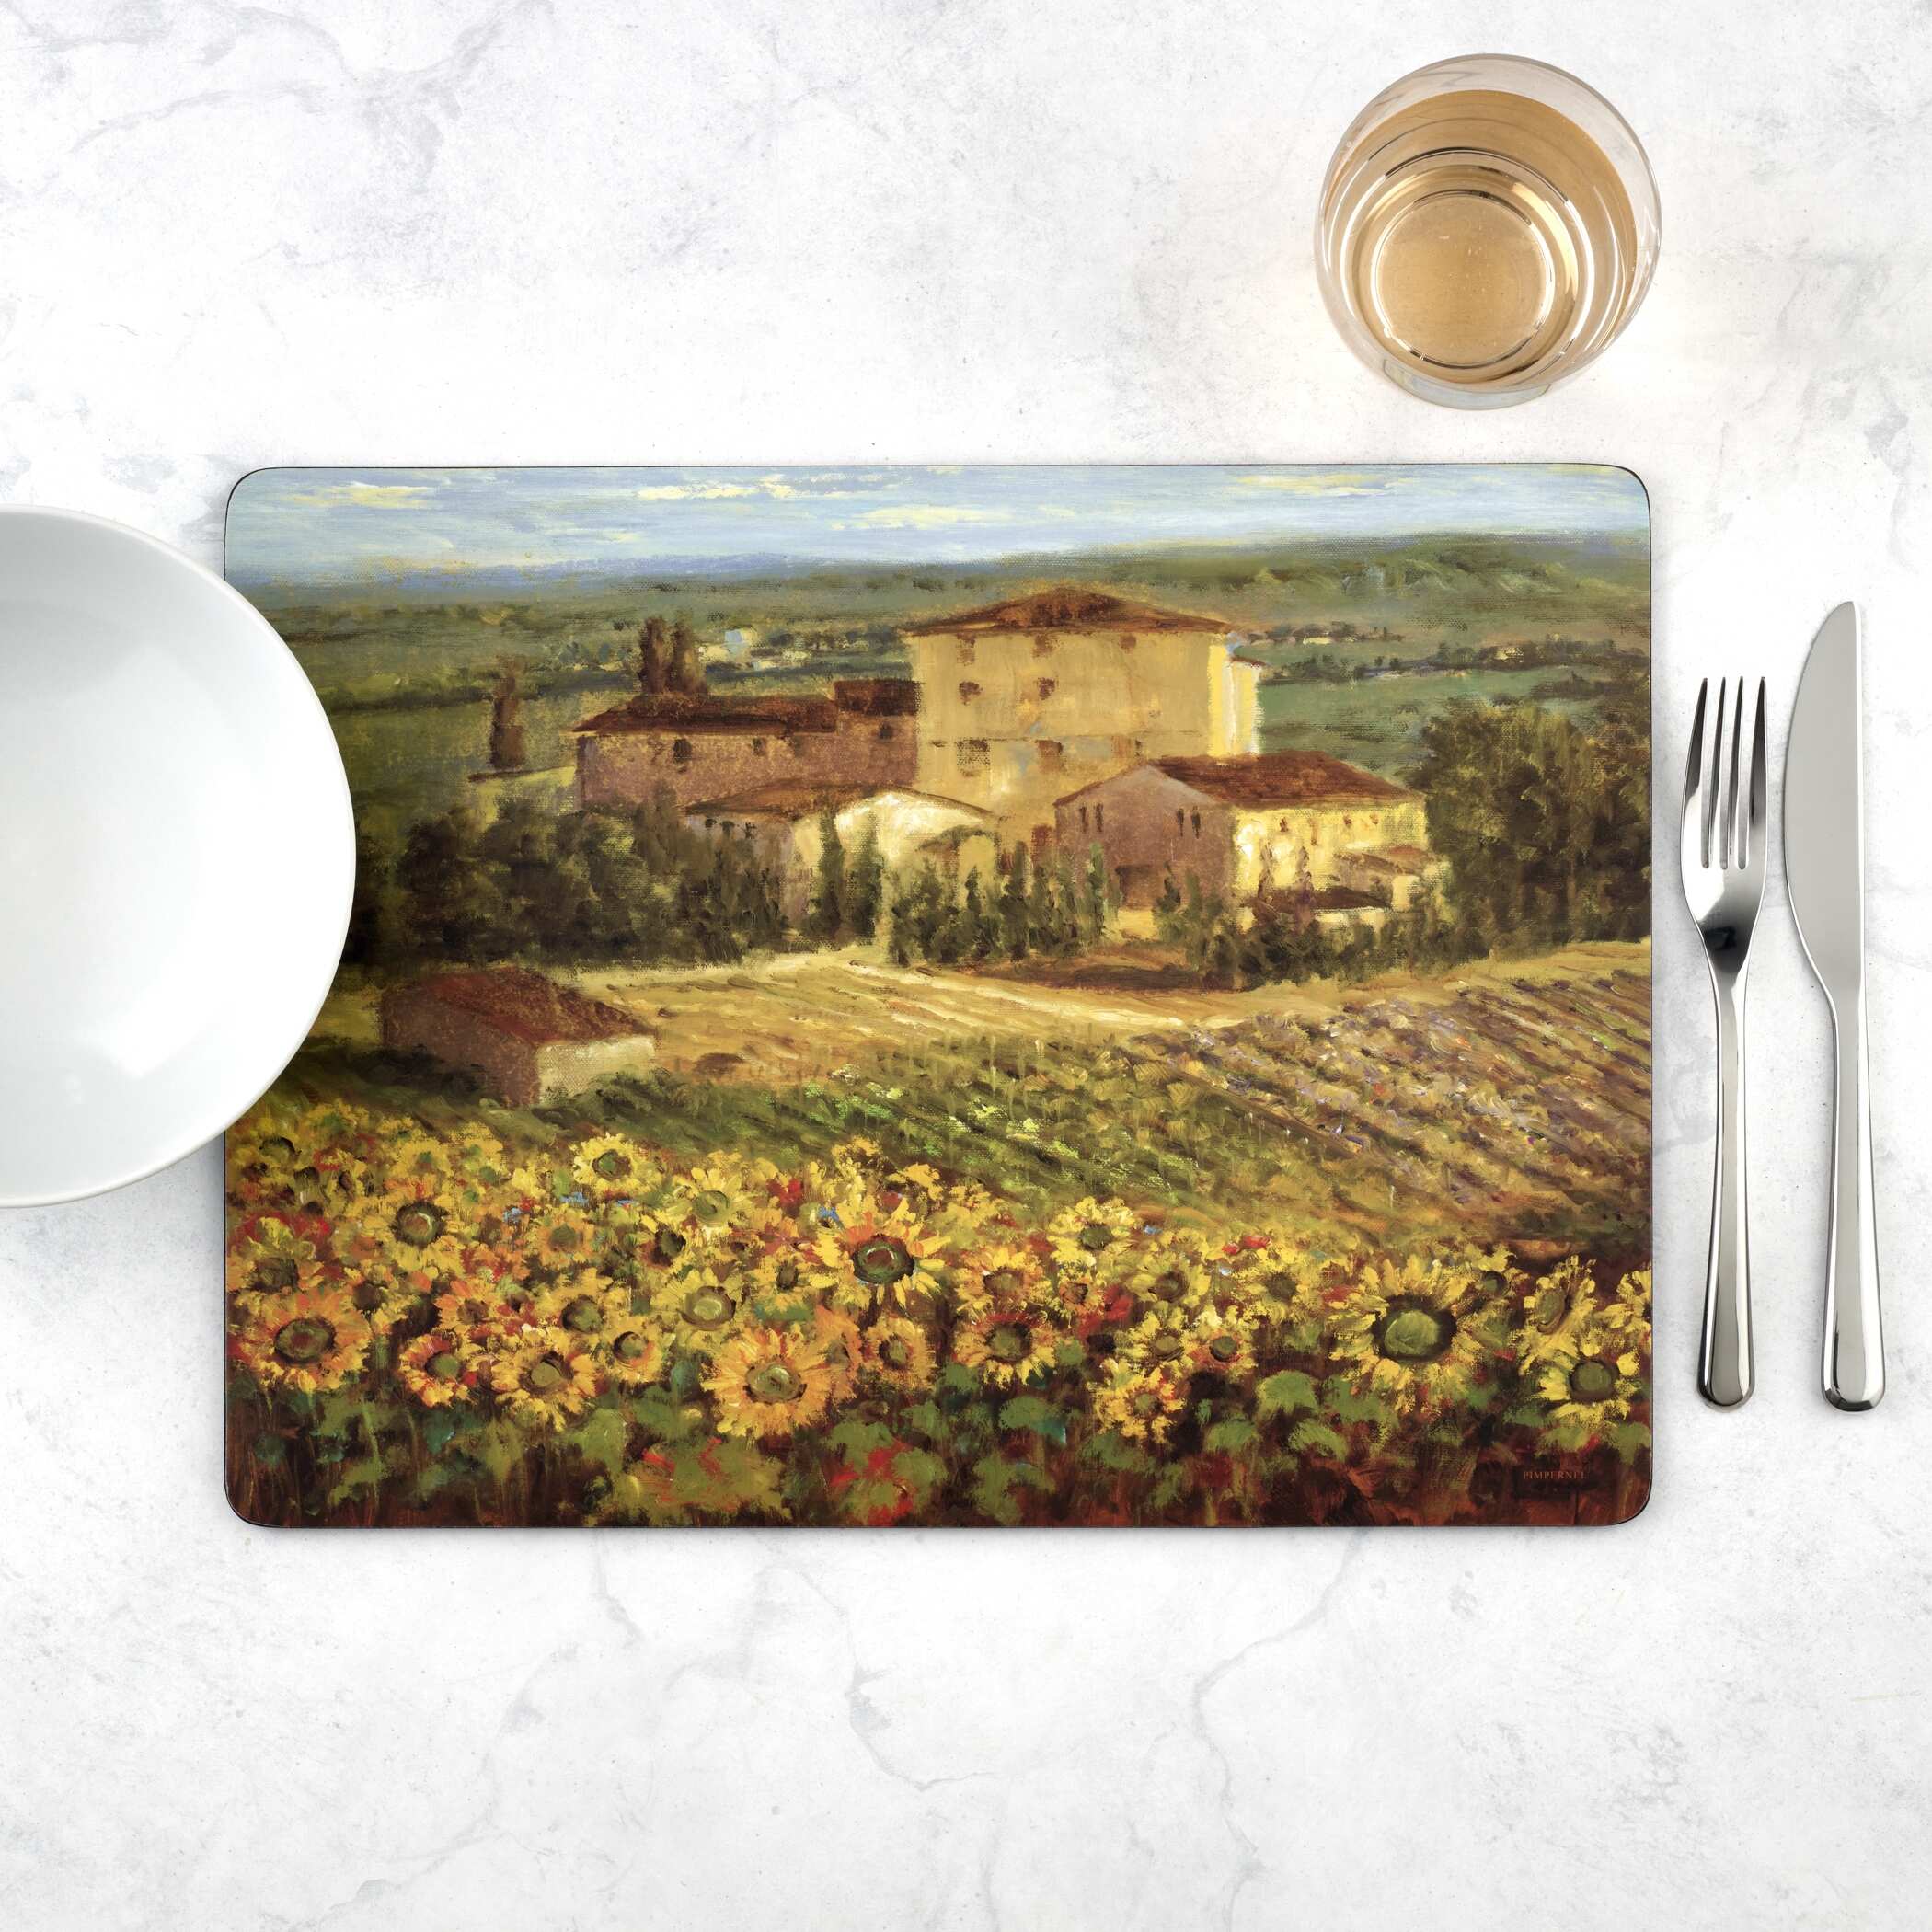 Pimpernel Tuscany Placemats Set of 4 - 15.7 inches x 11.7 each